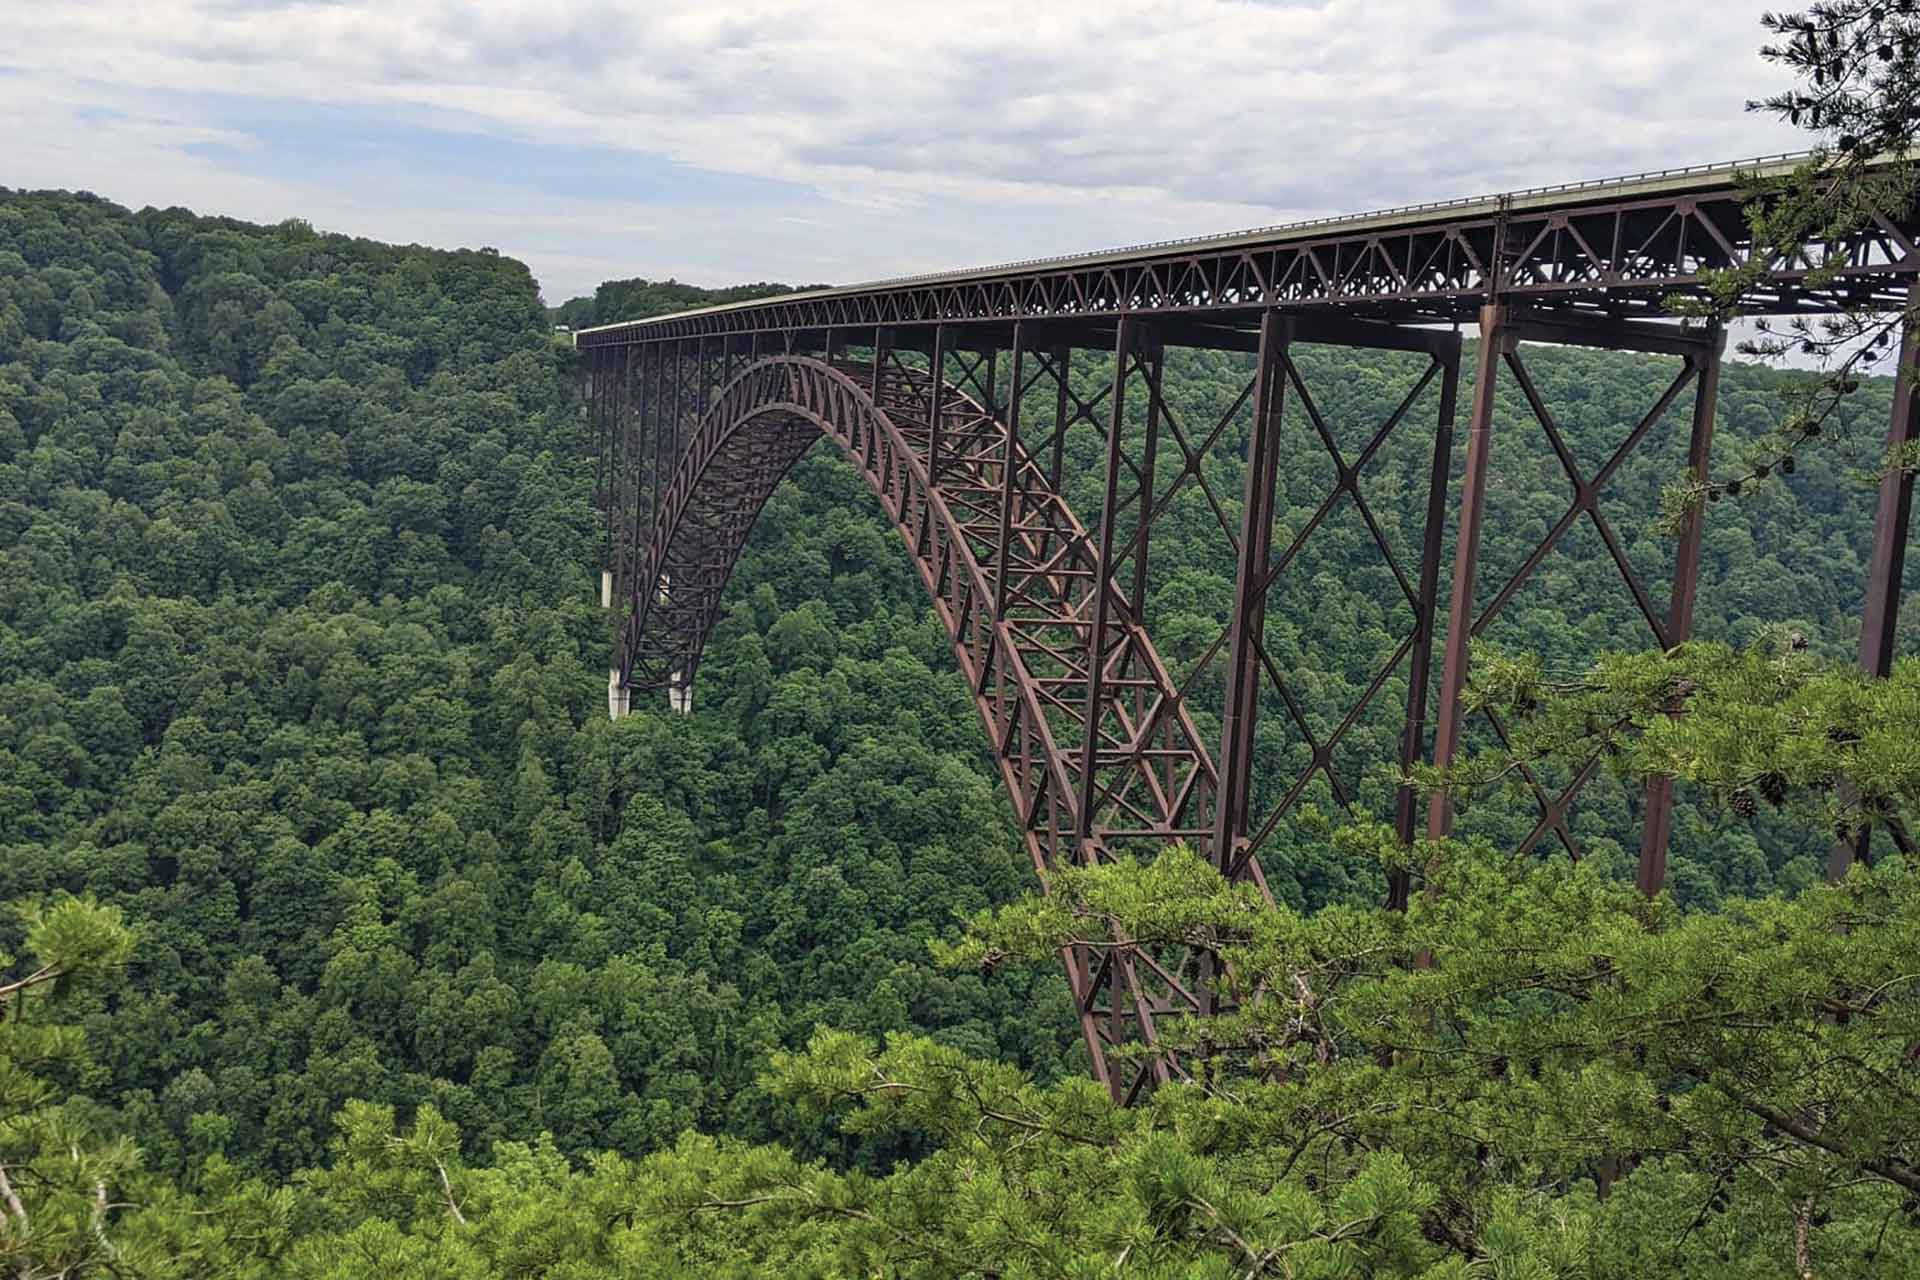 A large, iron arched bridge crosses the New River Gorge.